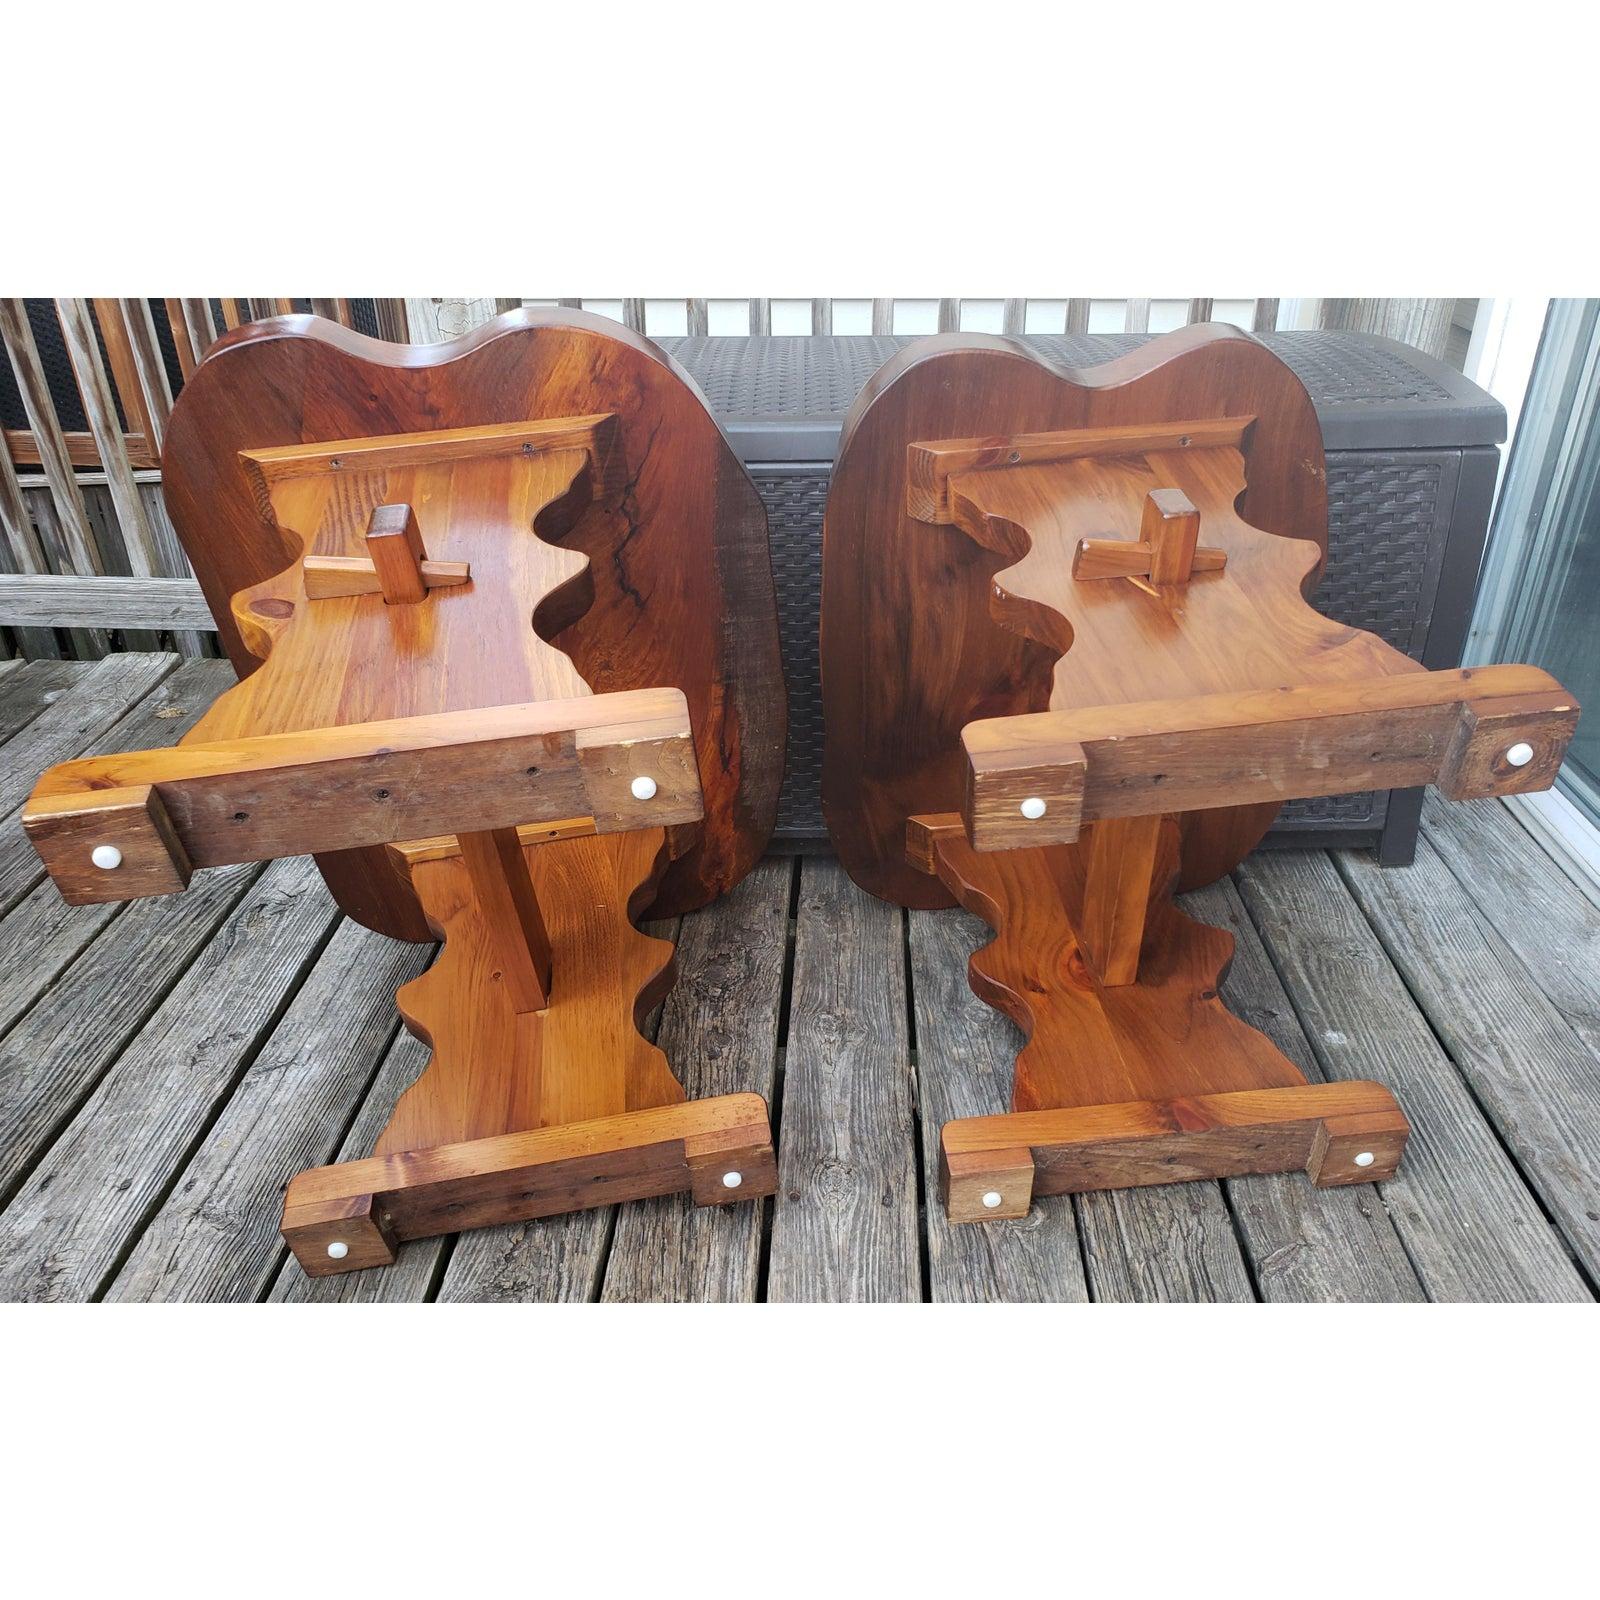 1980s Handcrafted Polished Walnut Pine Wood Slabs Trestle Side Tables, a Pair For Sale 2